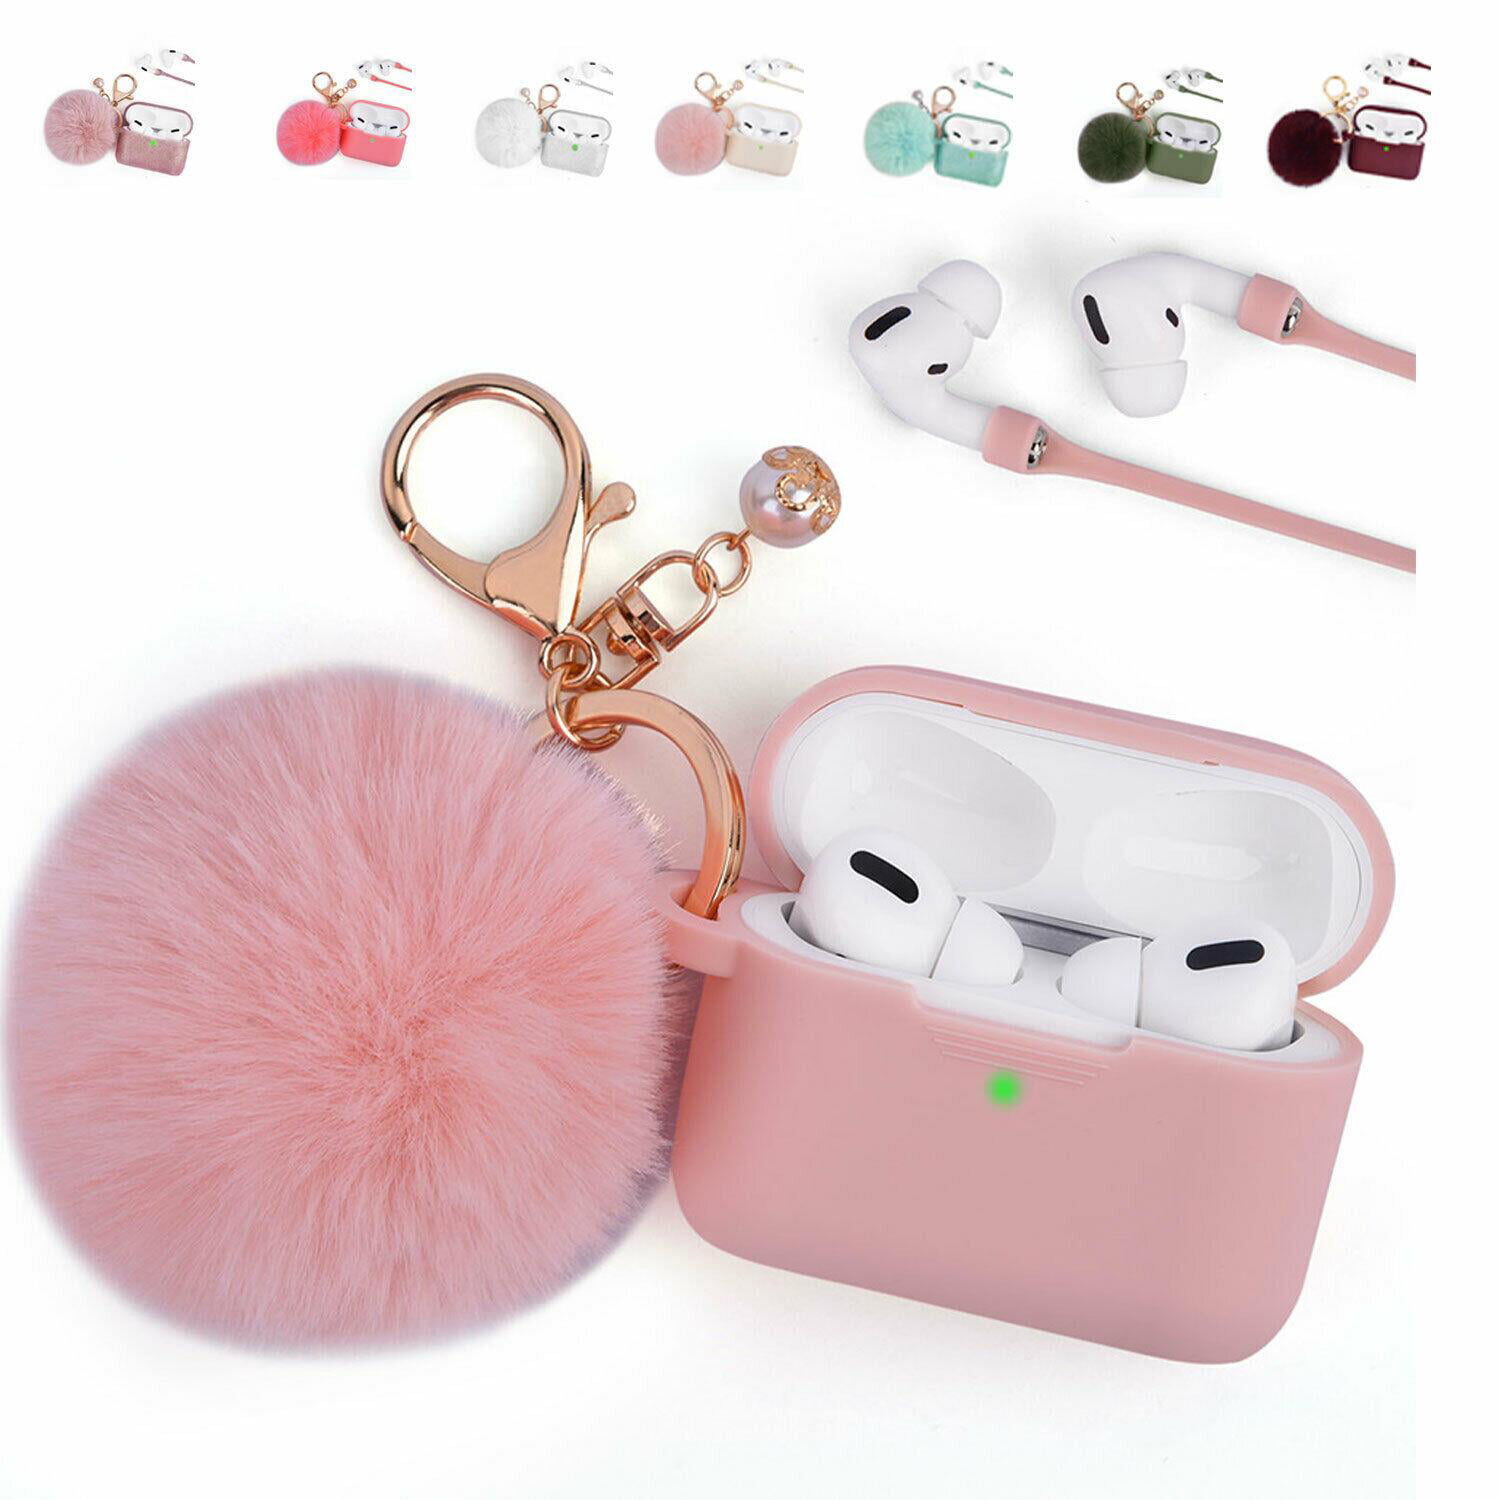 For Airpods Pro Case, LUXMO Airpod Case Cover for Apple Airpods Pro